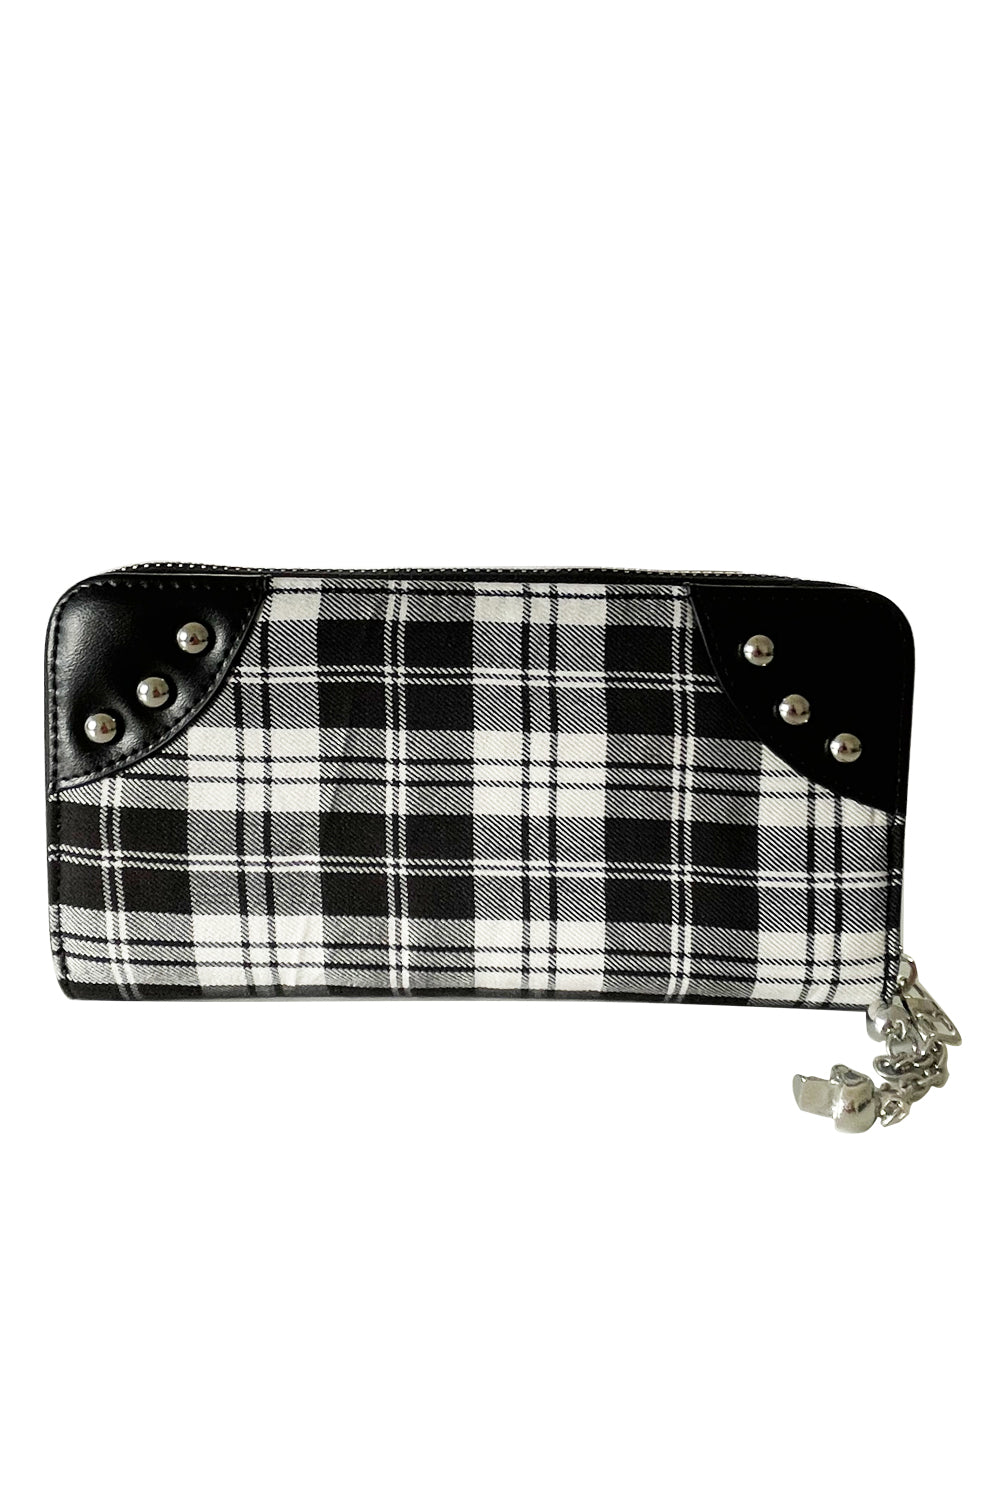 Banned Apparel Handcuff Wallet | Black/White